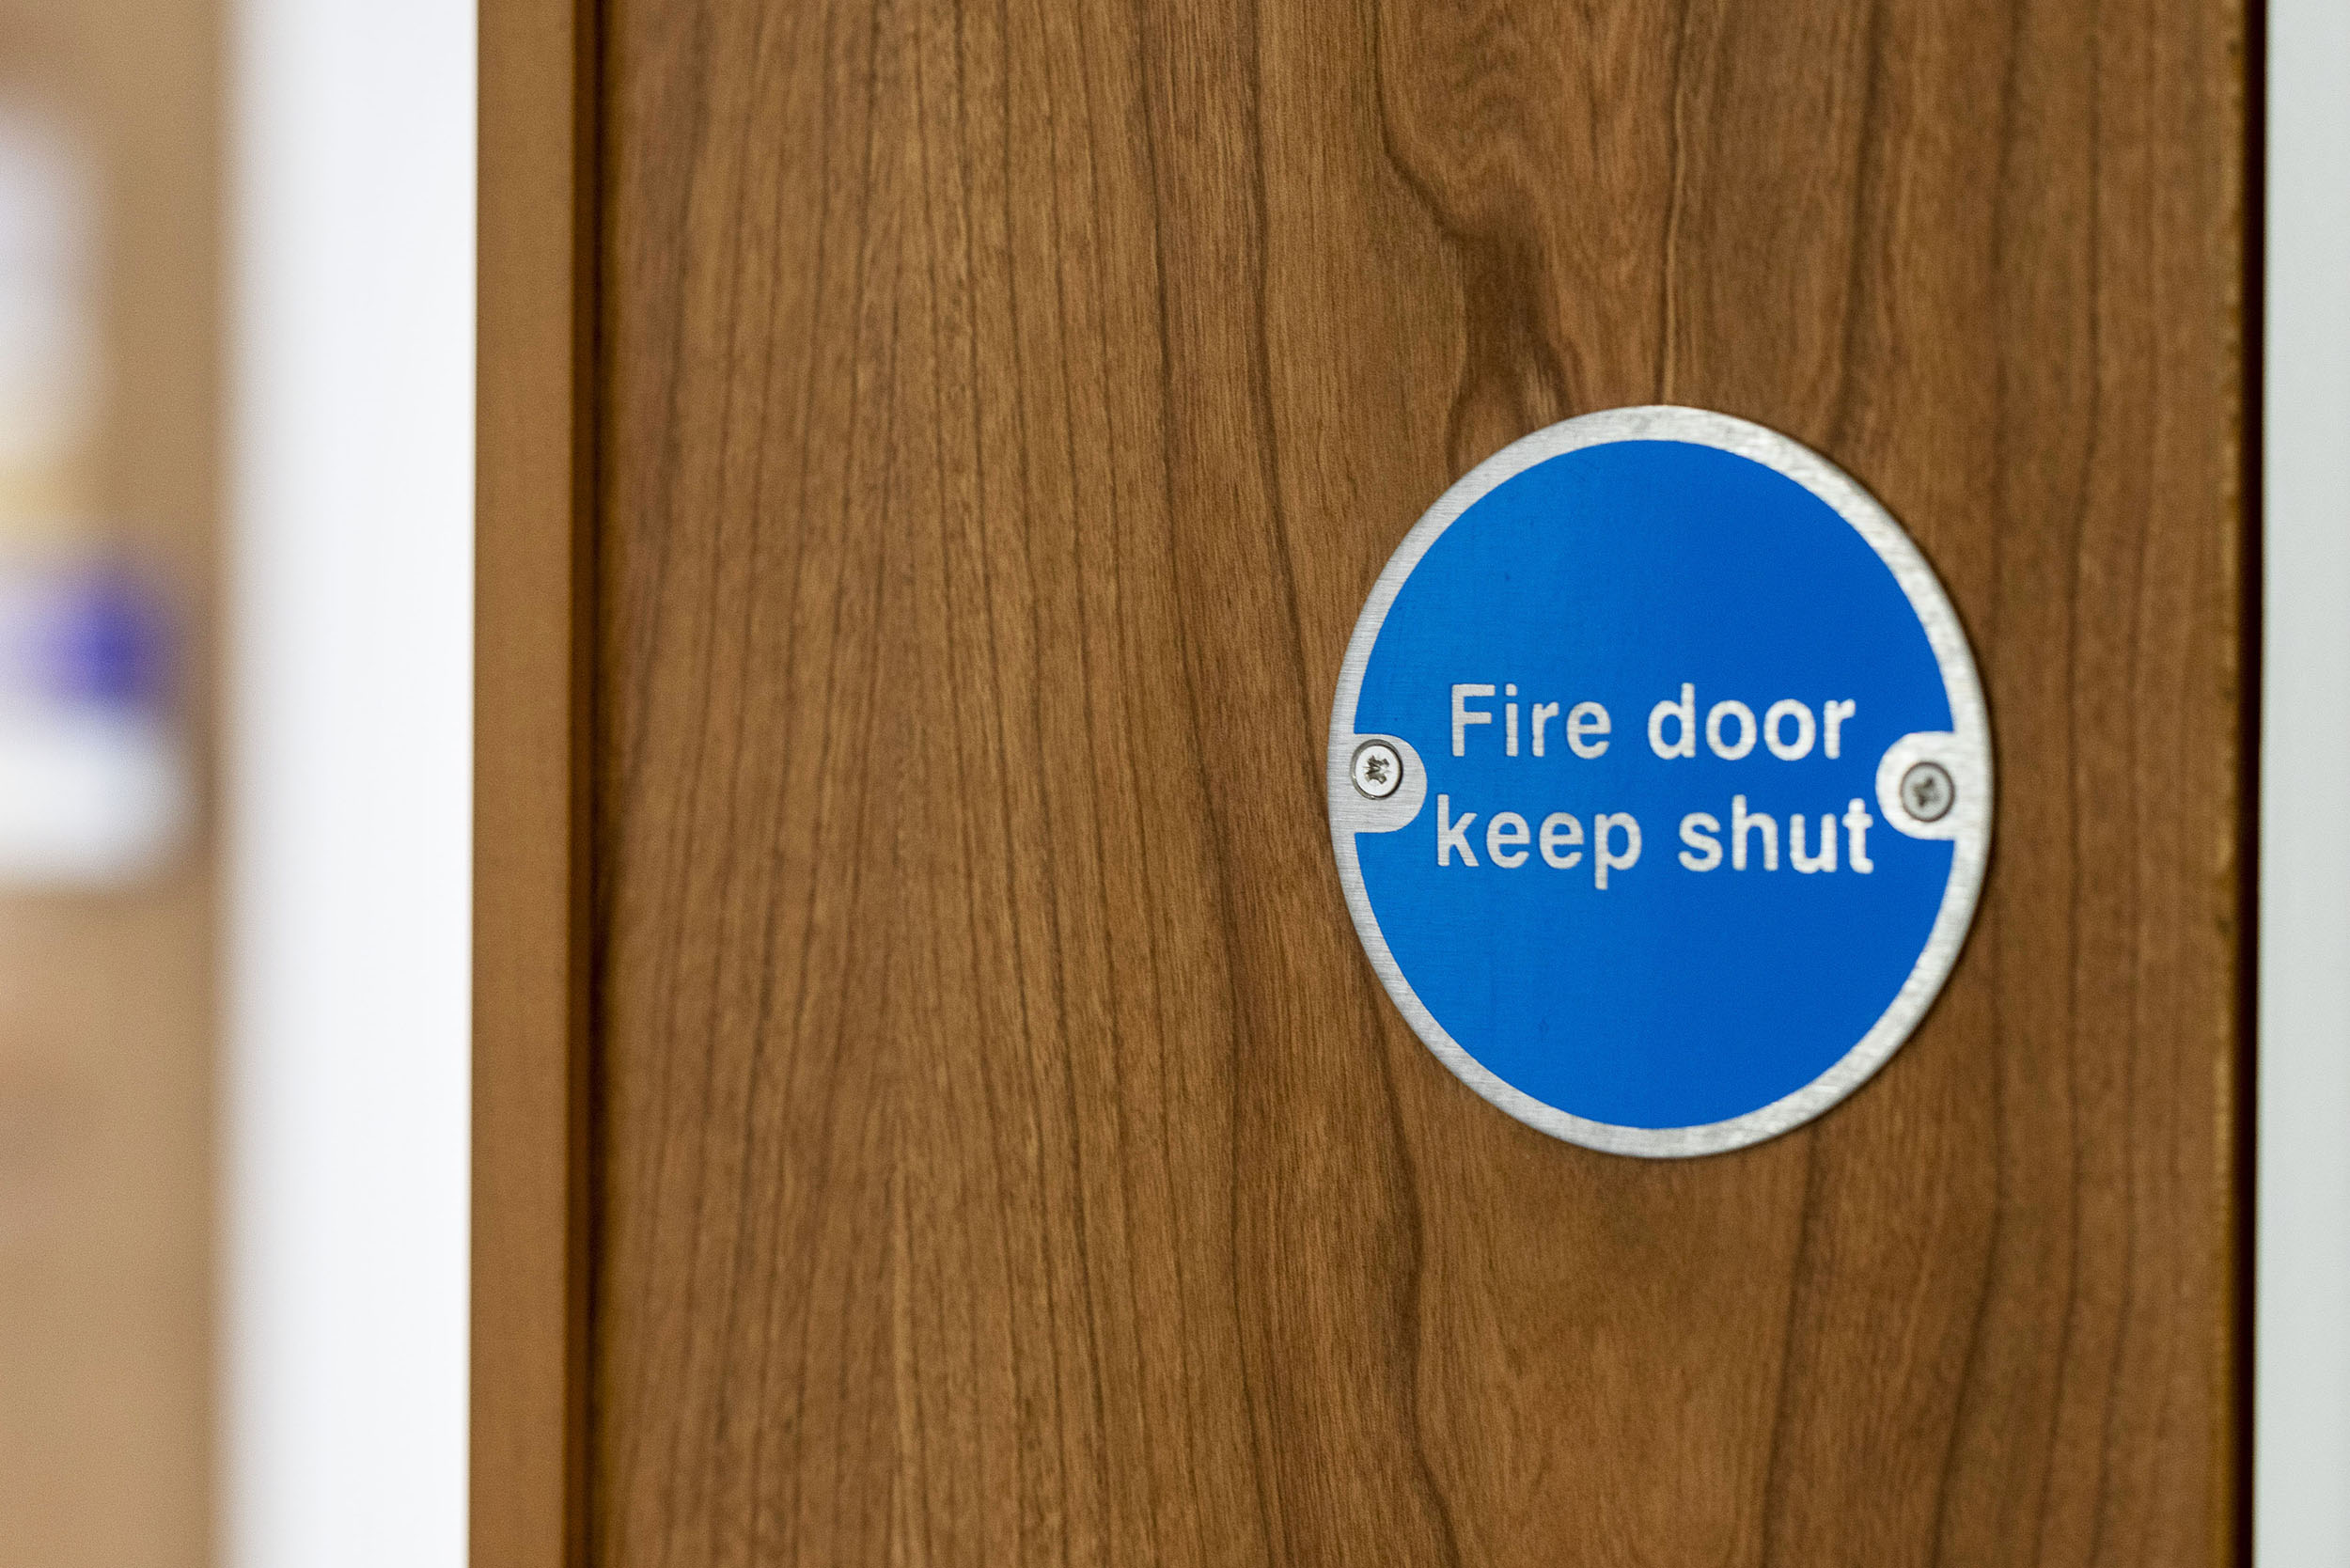 Custom Made Fire Doors Construction Products Regulations